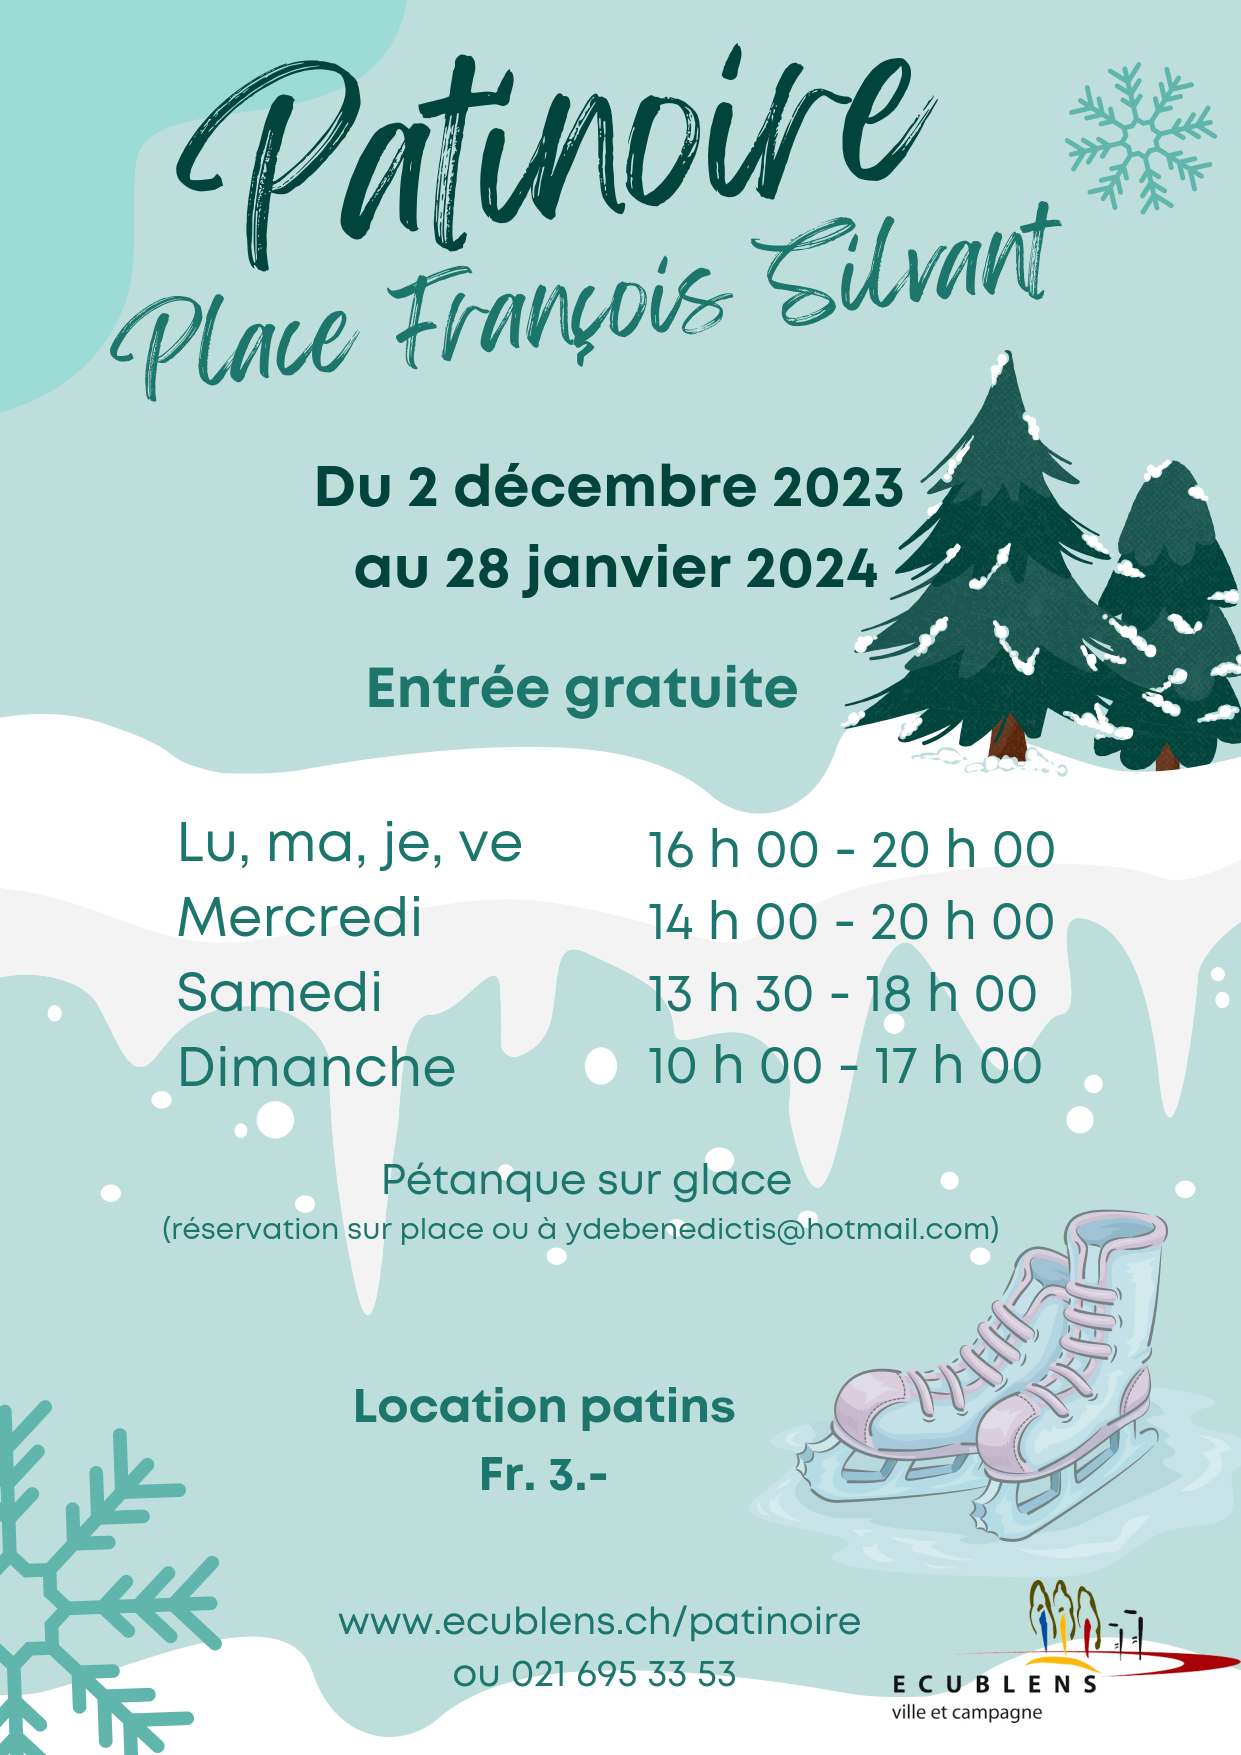 Patinoire 2023 flyer